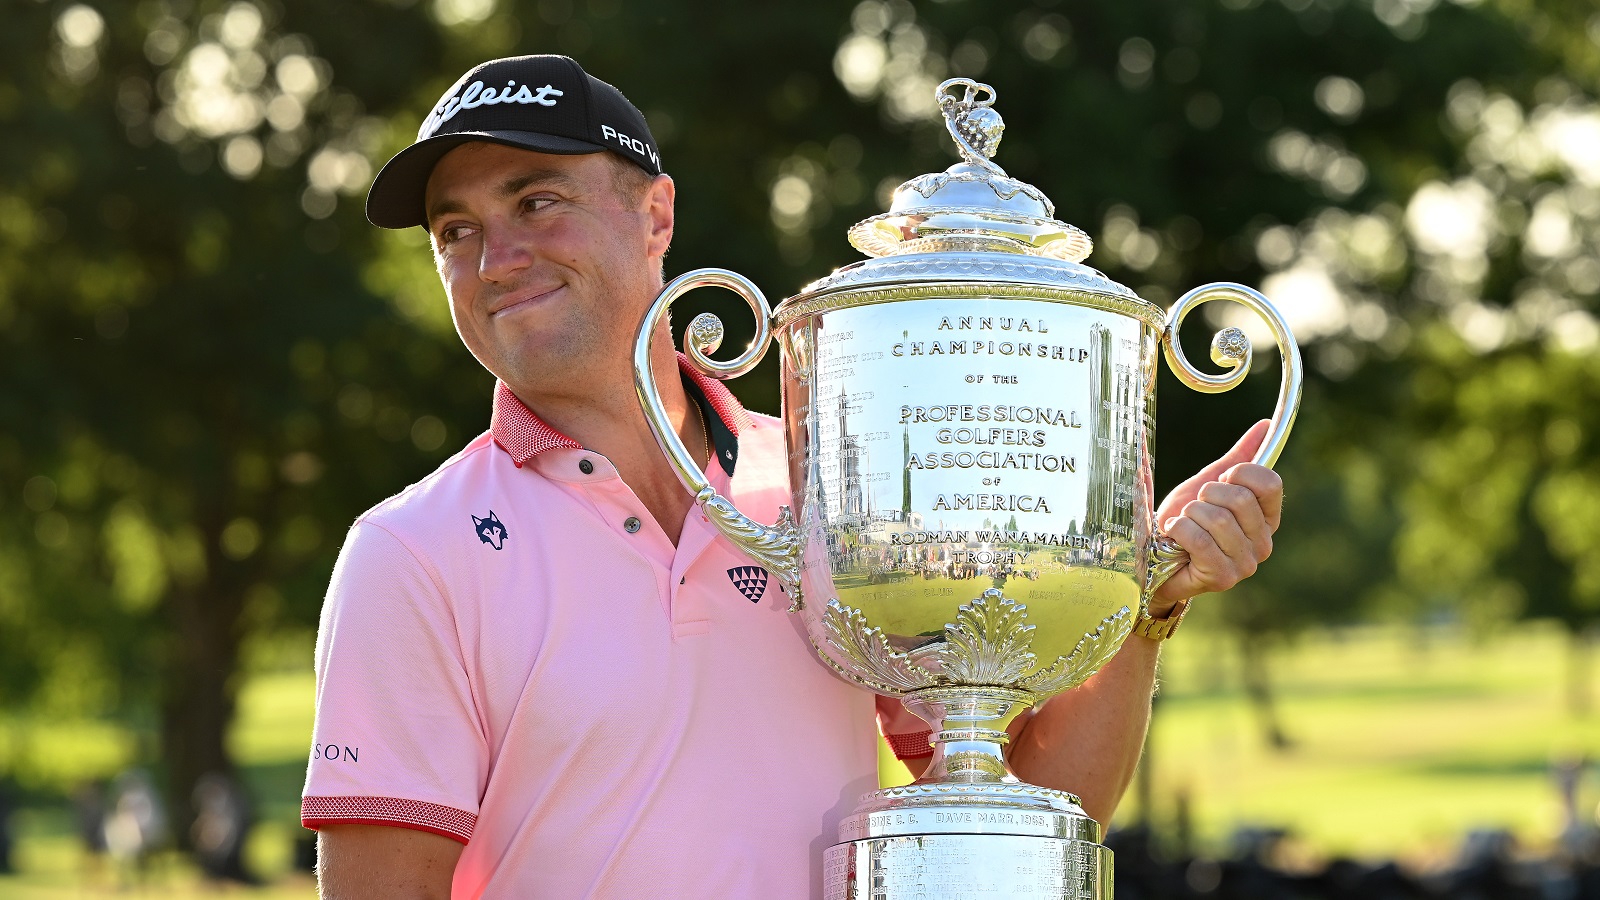 Justin Thomas celebrates with the Wanamaker Trophy after the final round of the PGA Championship at Southern Hills Country Club on May 22, 2022 in Tulsa, Oklahoma. | Ross Kinnaird/Getty Images